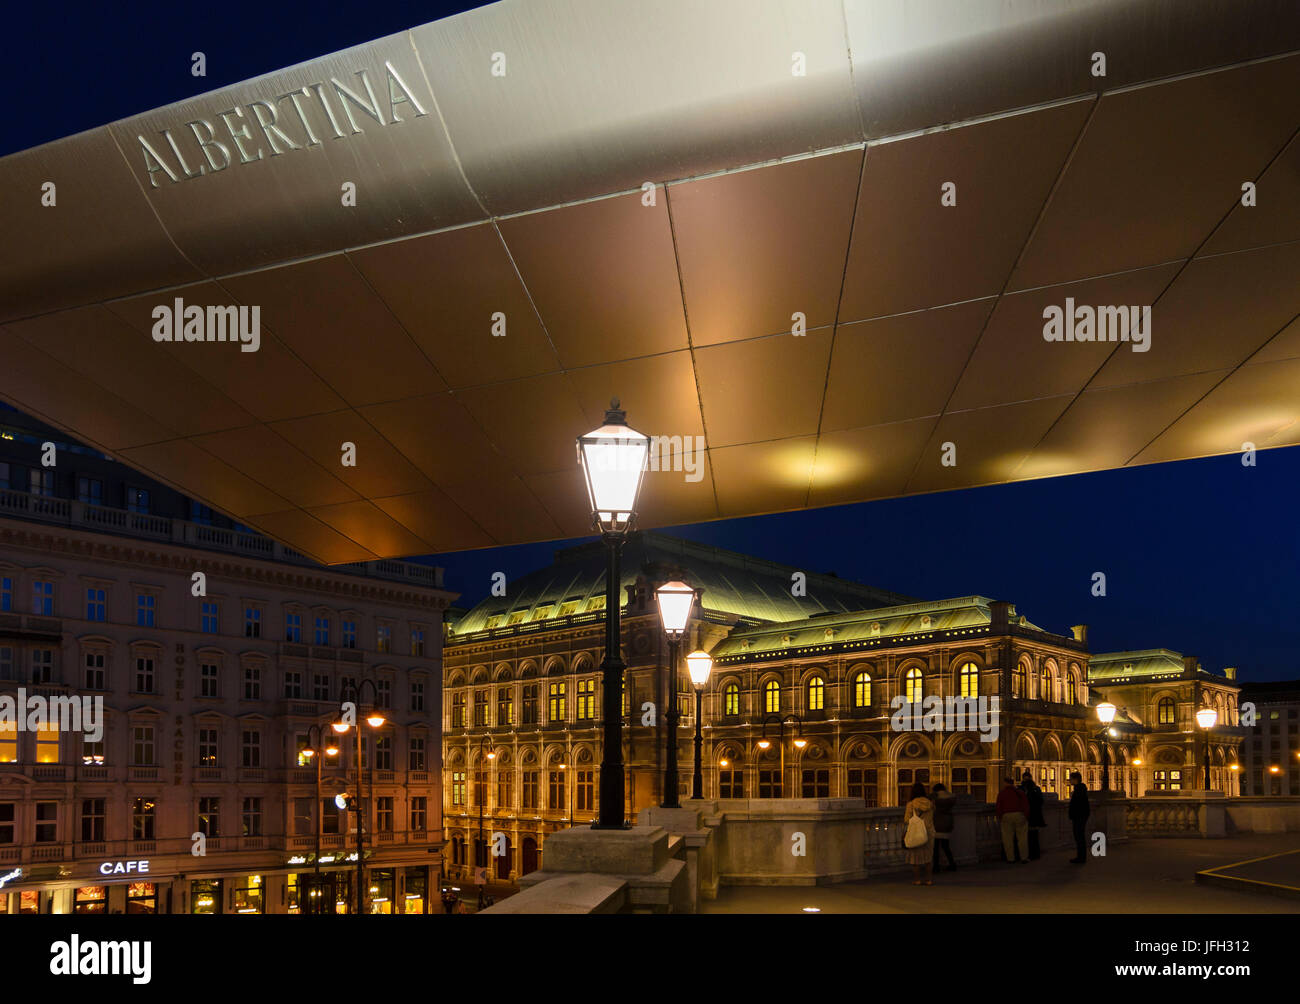 Albertina with the striking flight roof named 'Soravia Wing' by Hans Hollein, view to the Staatsoper, Austria, Vienna, 01., Vienna Stock Photo